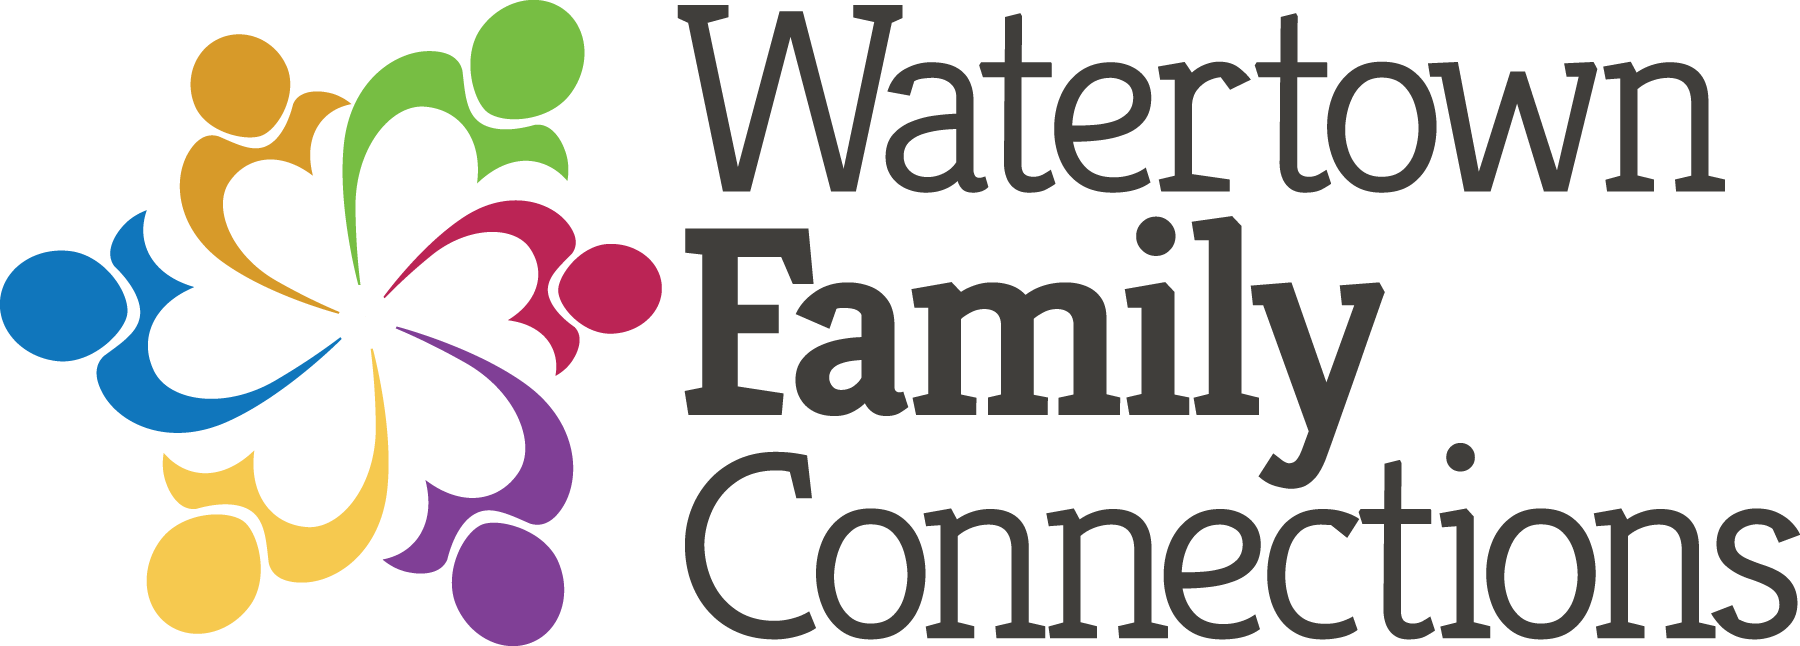 Watertown Family Connections